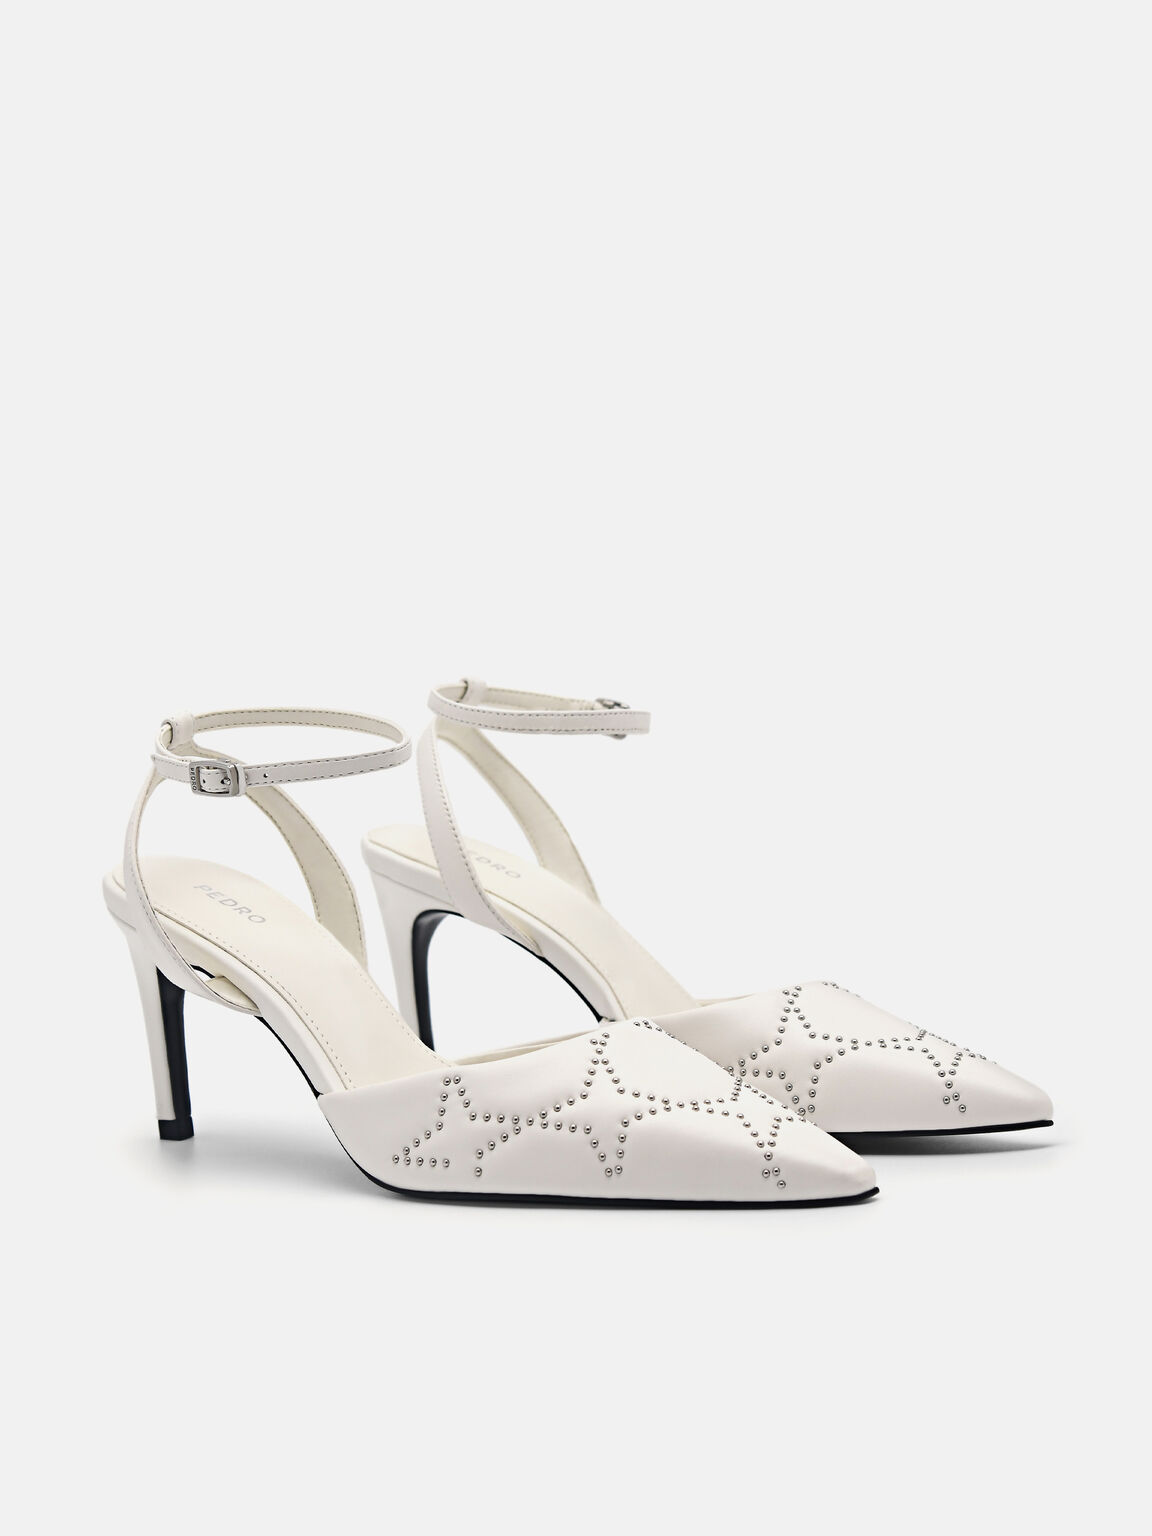 Joan Leather Pumps, White, hi-res